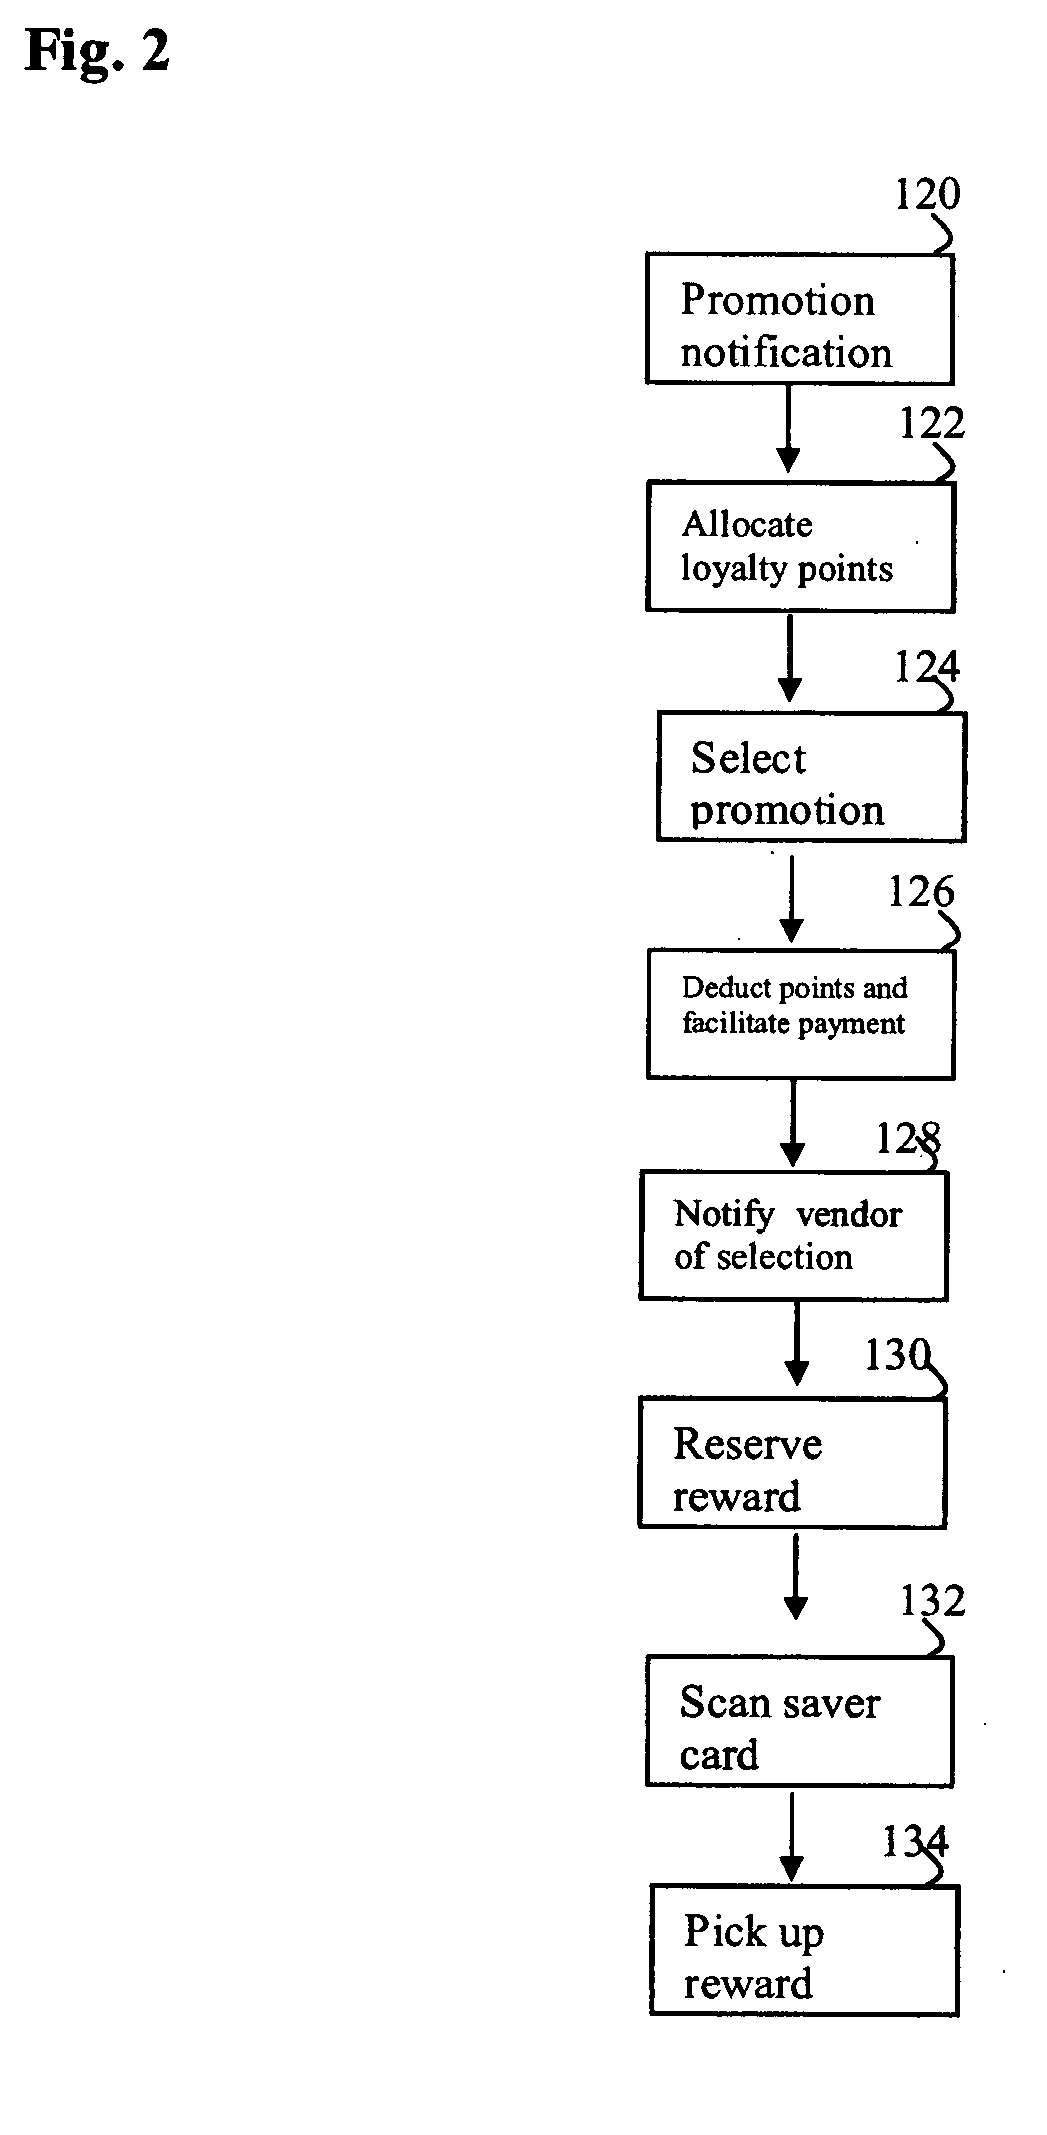 System and method for electronic reservation of real-time redemption of advertiser's loyalty points for rewards and discount coupons and gift card certificates